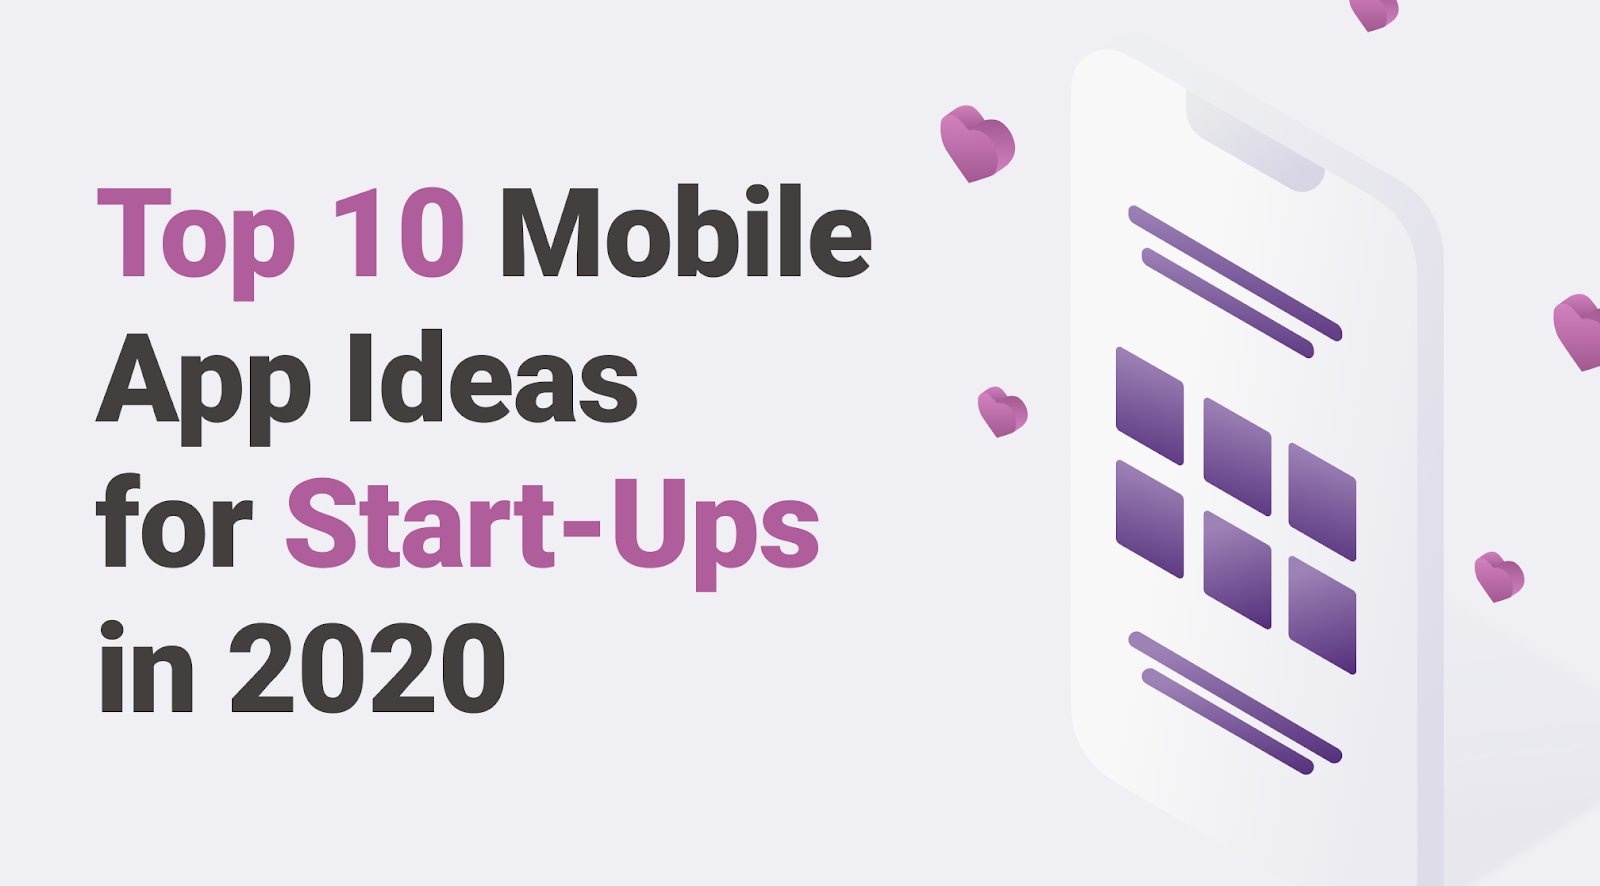 Top 10 Mobile App Ideas for Start-Ups in 2020